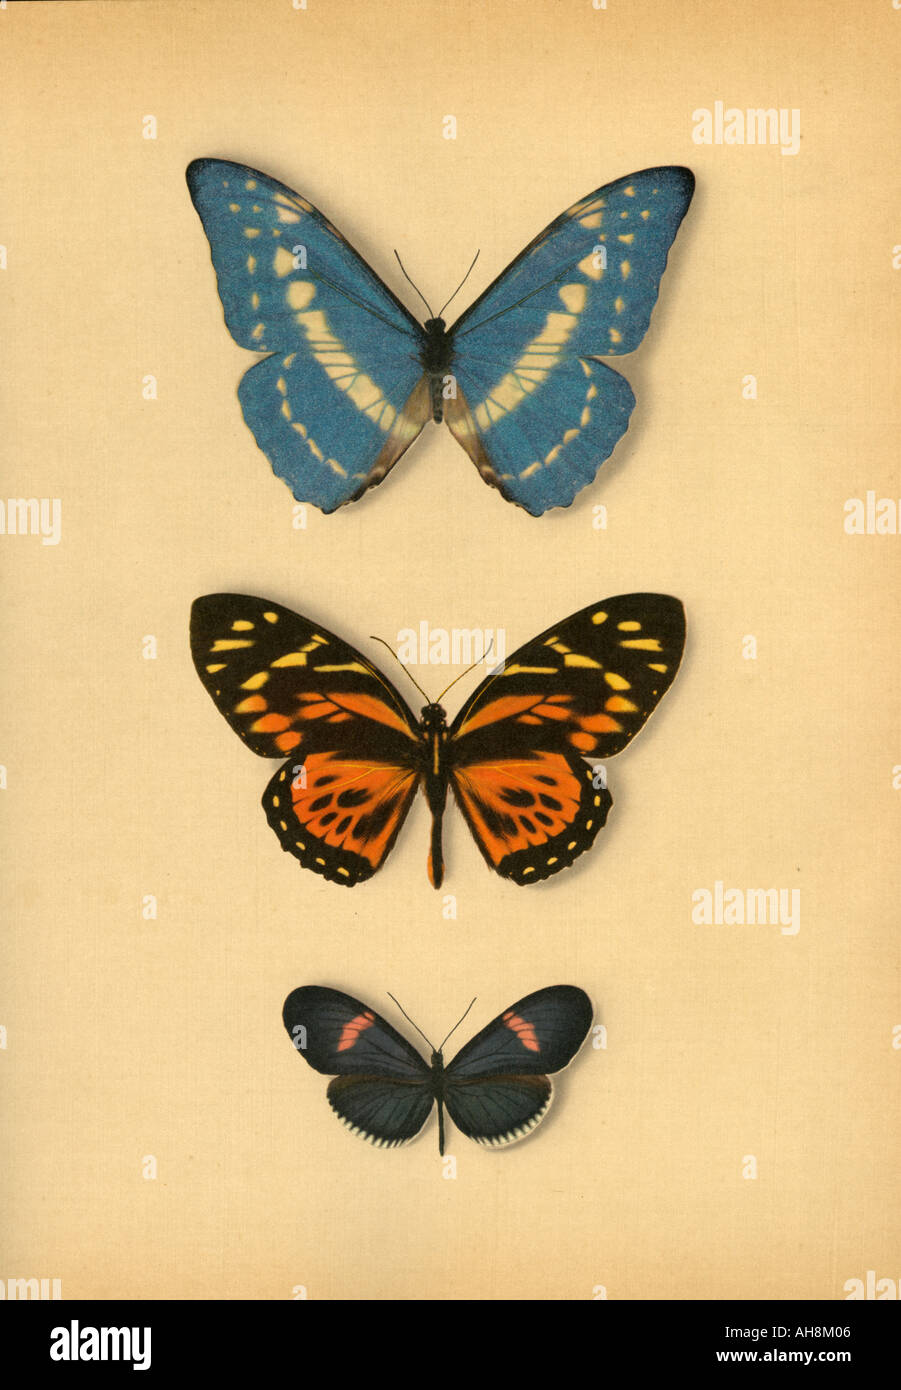 AAD71483 Three artistic colorful mounted butterflies moths Stock Photo